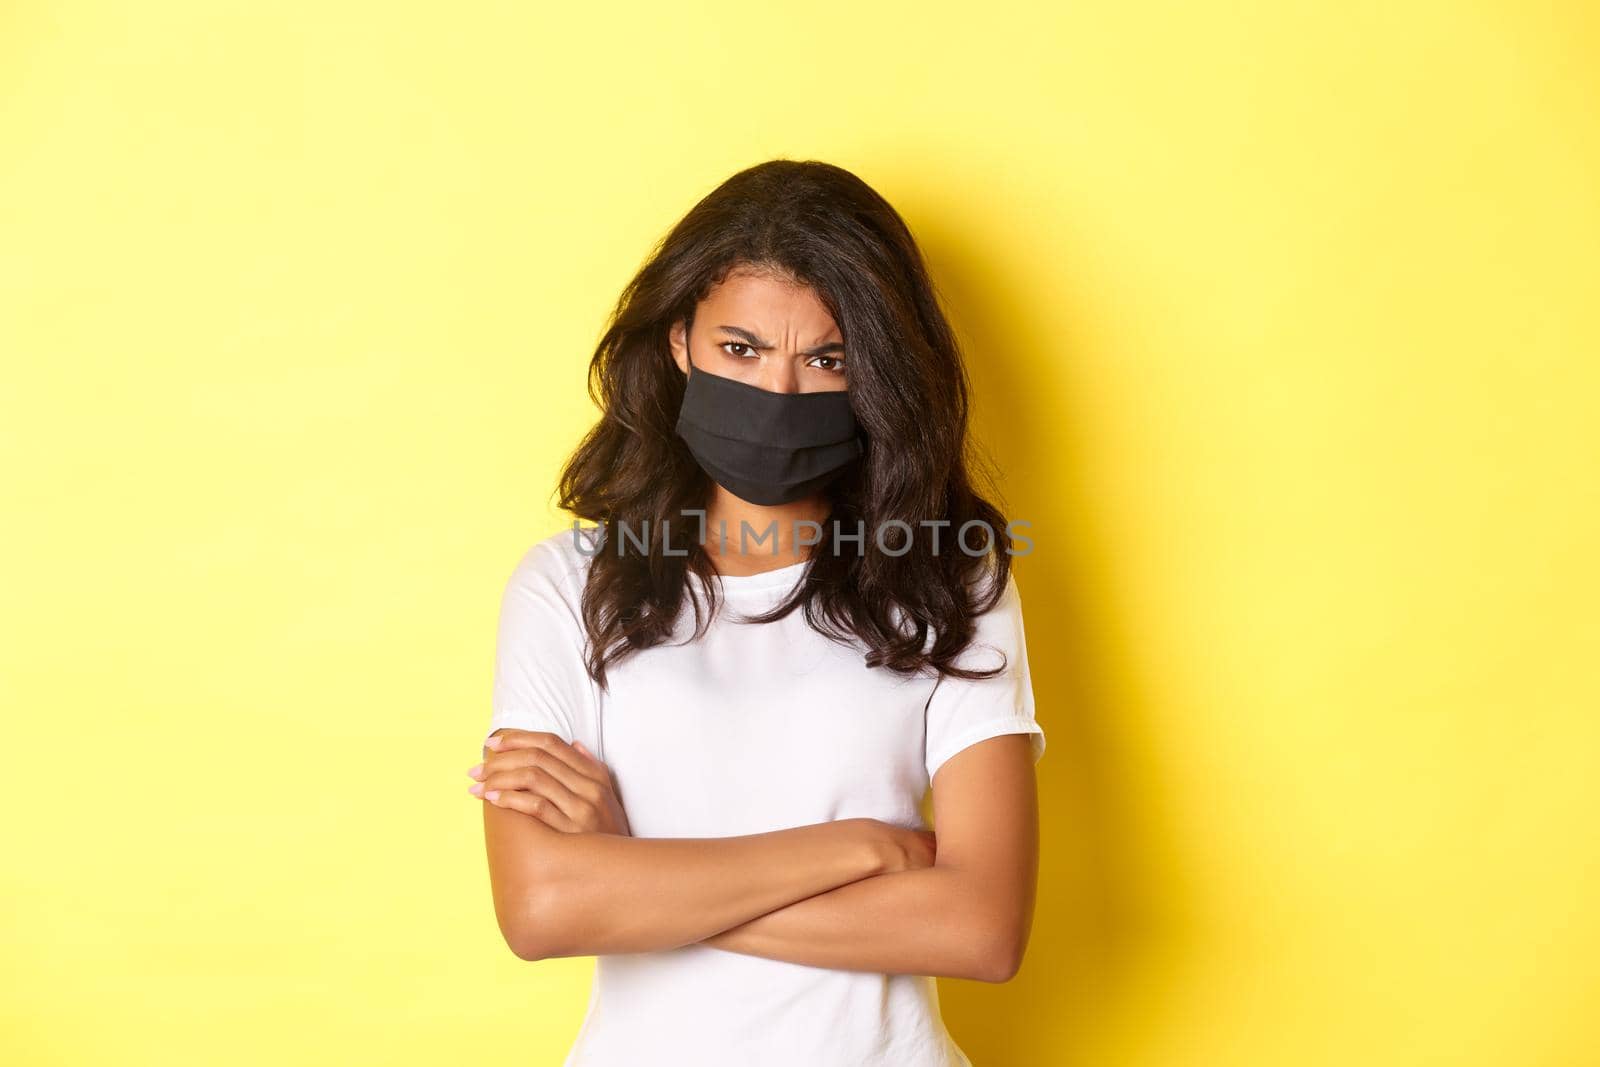 Concept of covid-19, social distancing and lifestyle. Angry and offended african-american girl, wearing face mask, being mad at someone, cross arms on chest and frowning, yellow background.